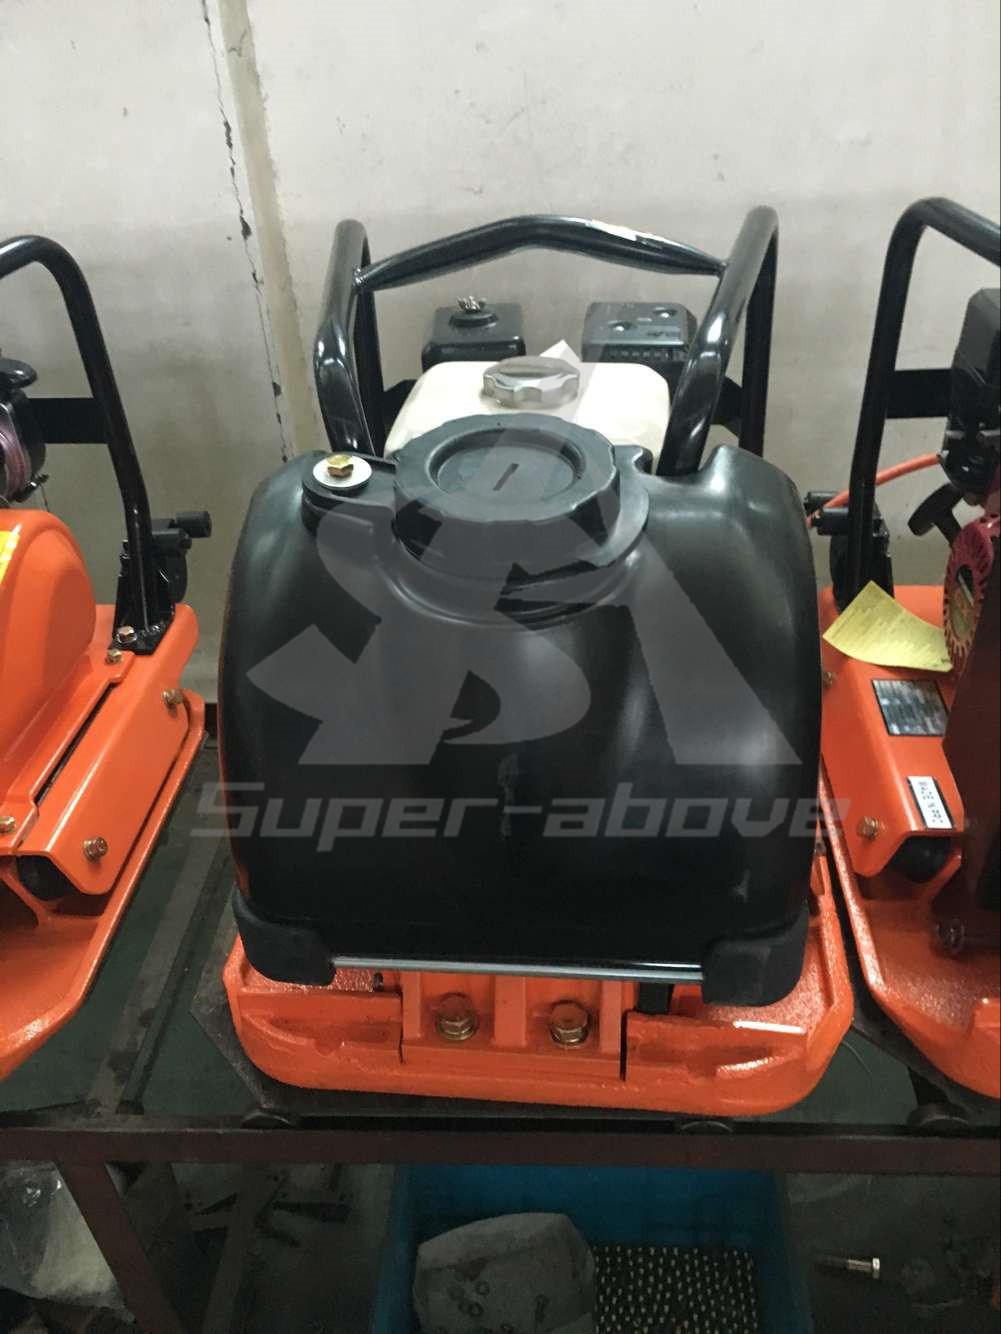 5.5HP Honda Gx160 Engine Tamping Rammer with Best Price